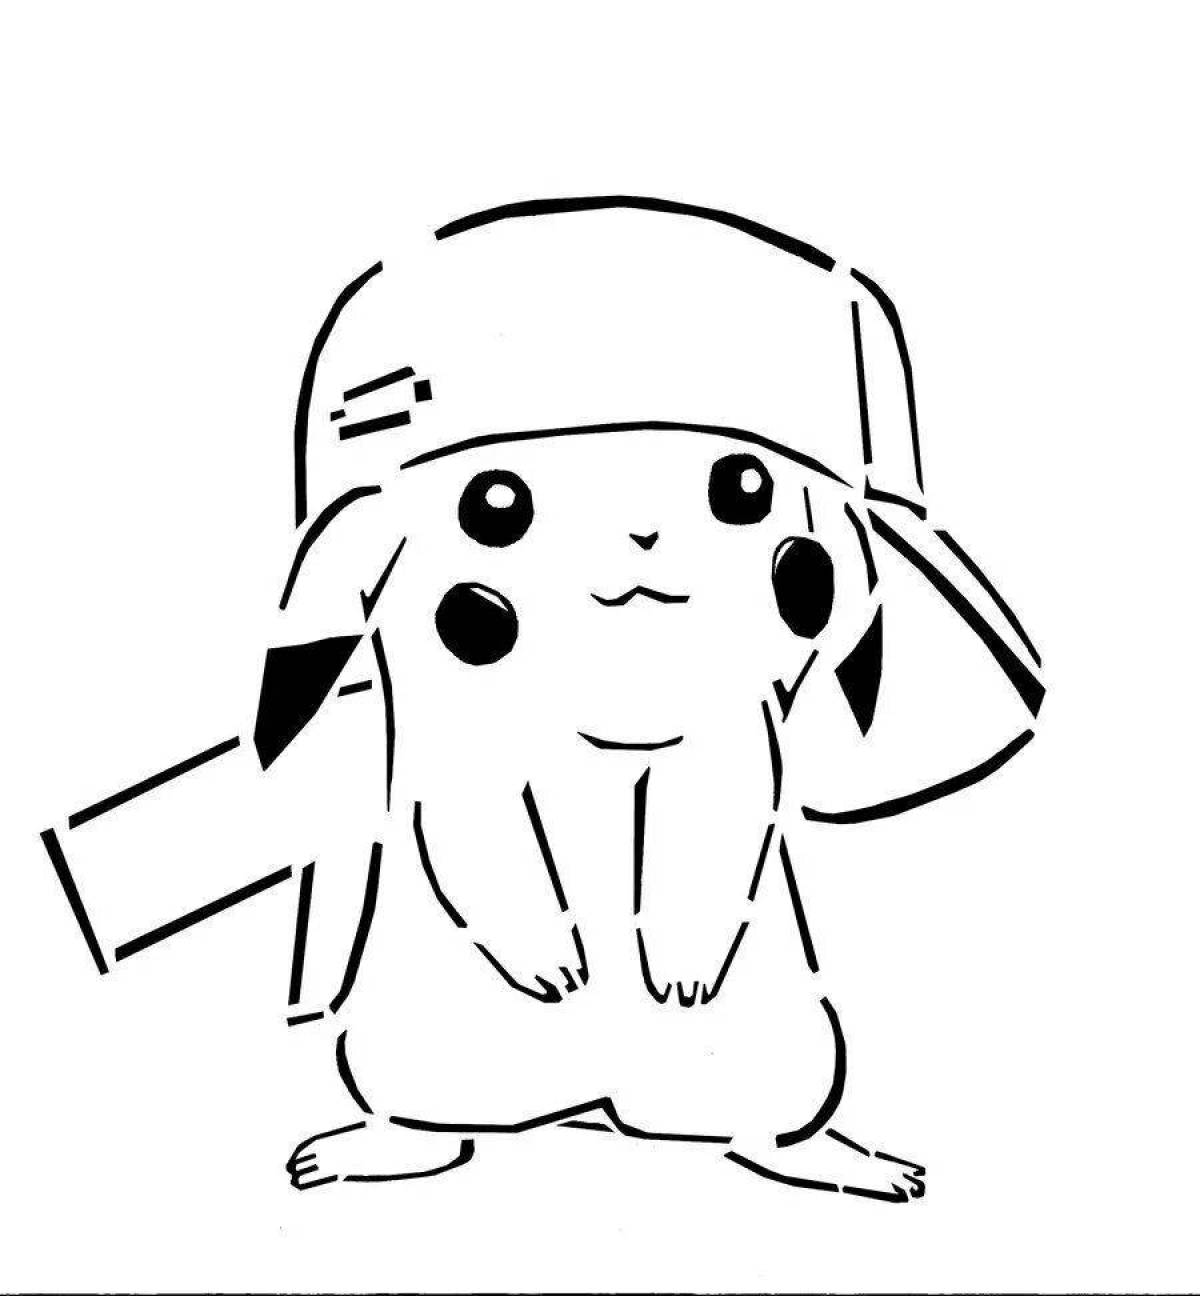 Refreshing coloring of pikachu in a cap